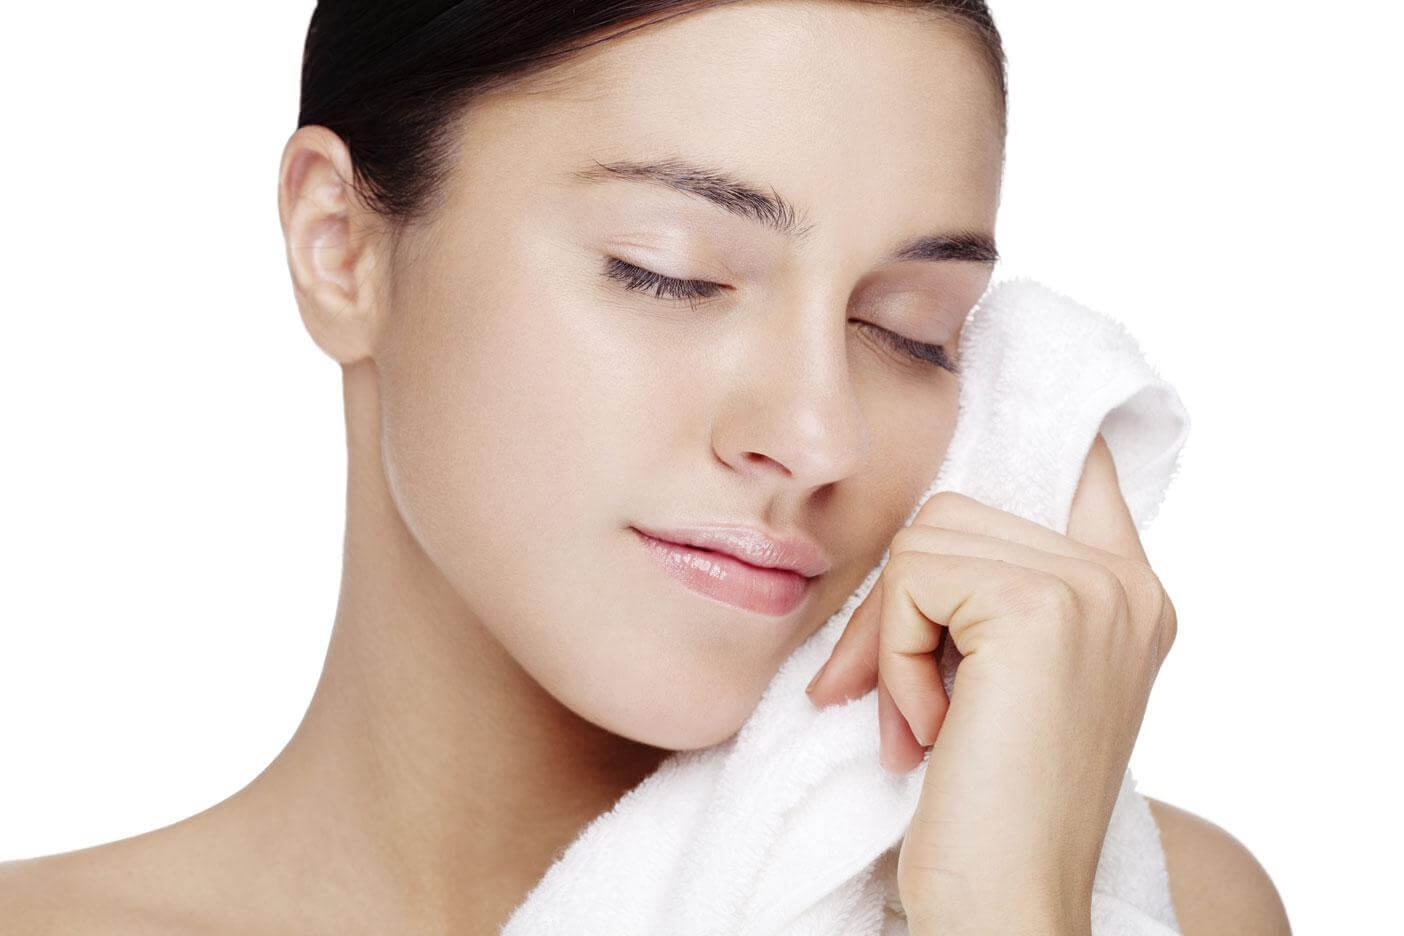 How to take care of dry and sensitive skin safely